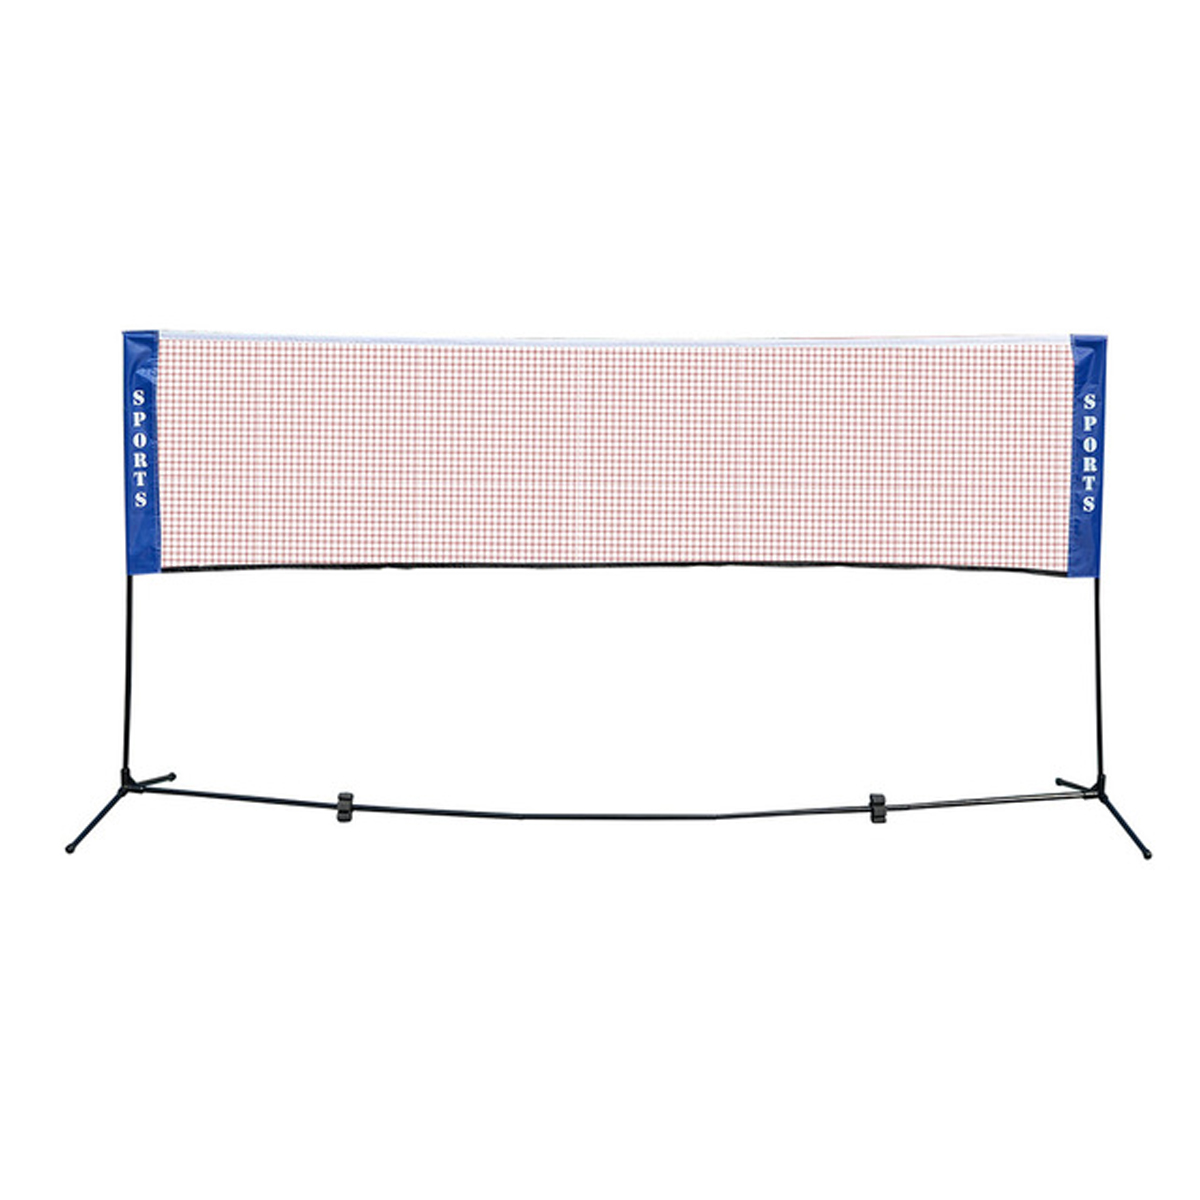 

4.1M/5.1M Portable Sports Badminton Volleyball Tennis Net Set Foldable Frame Stand